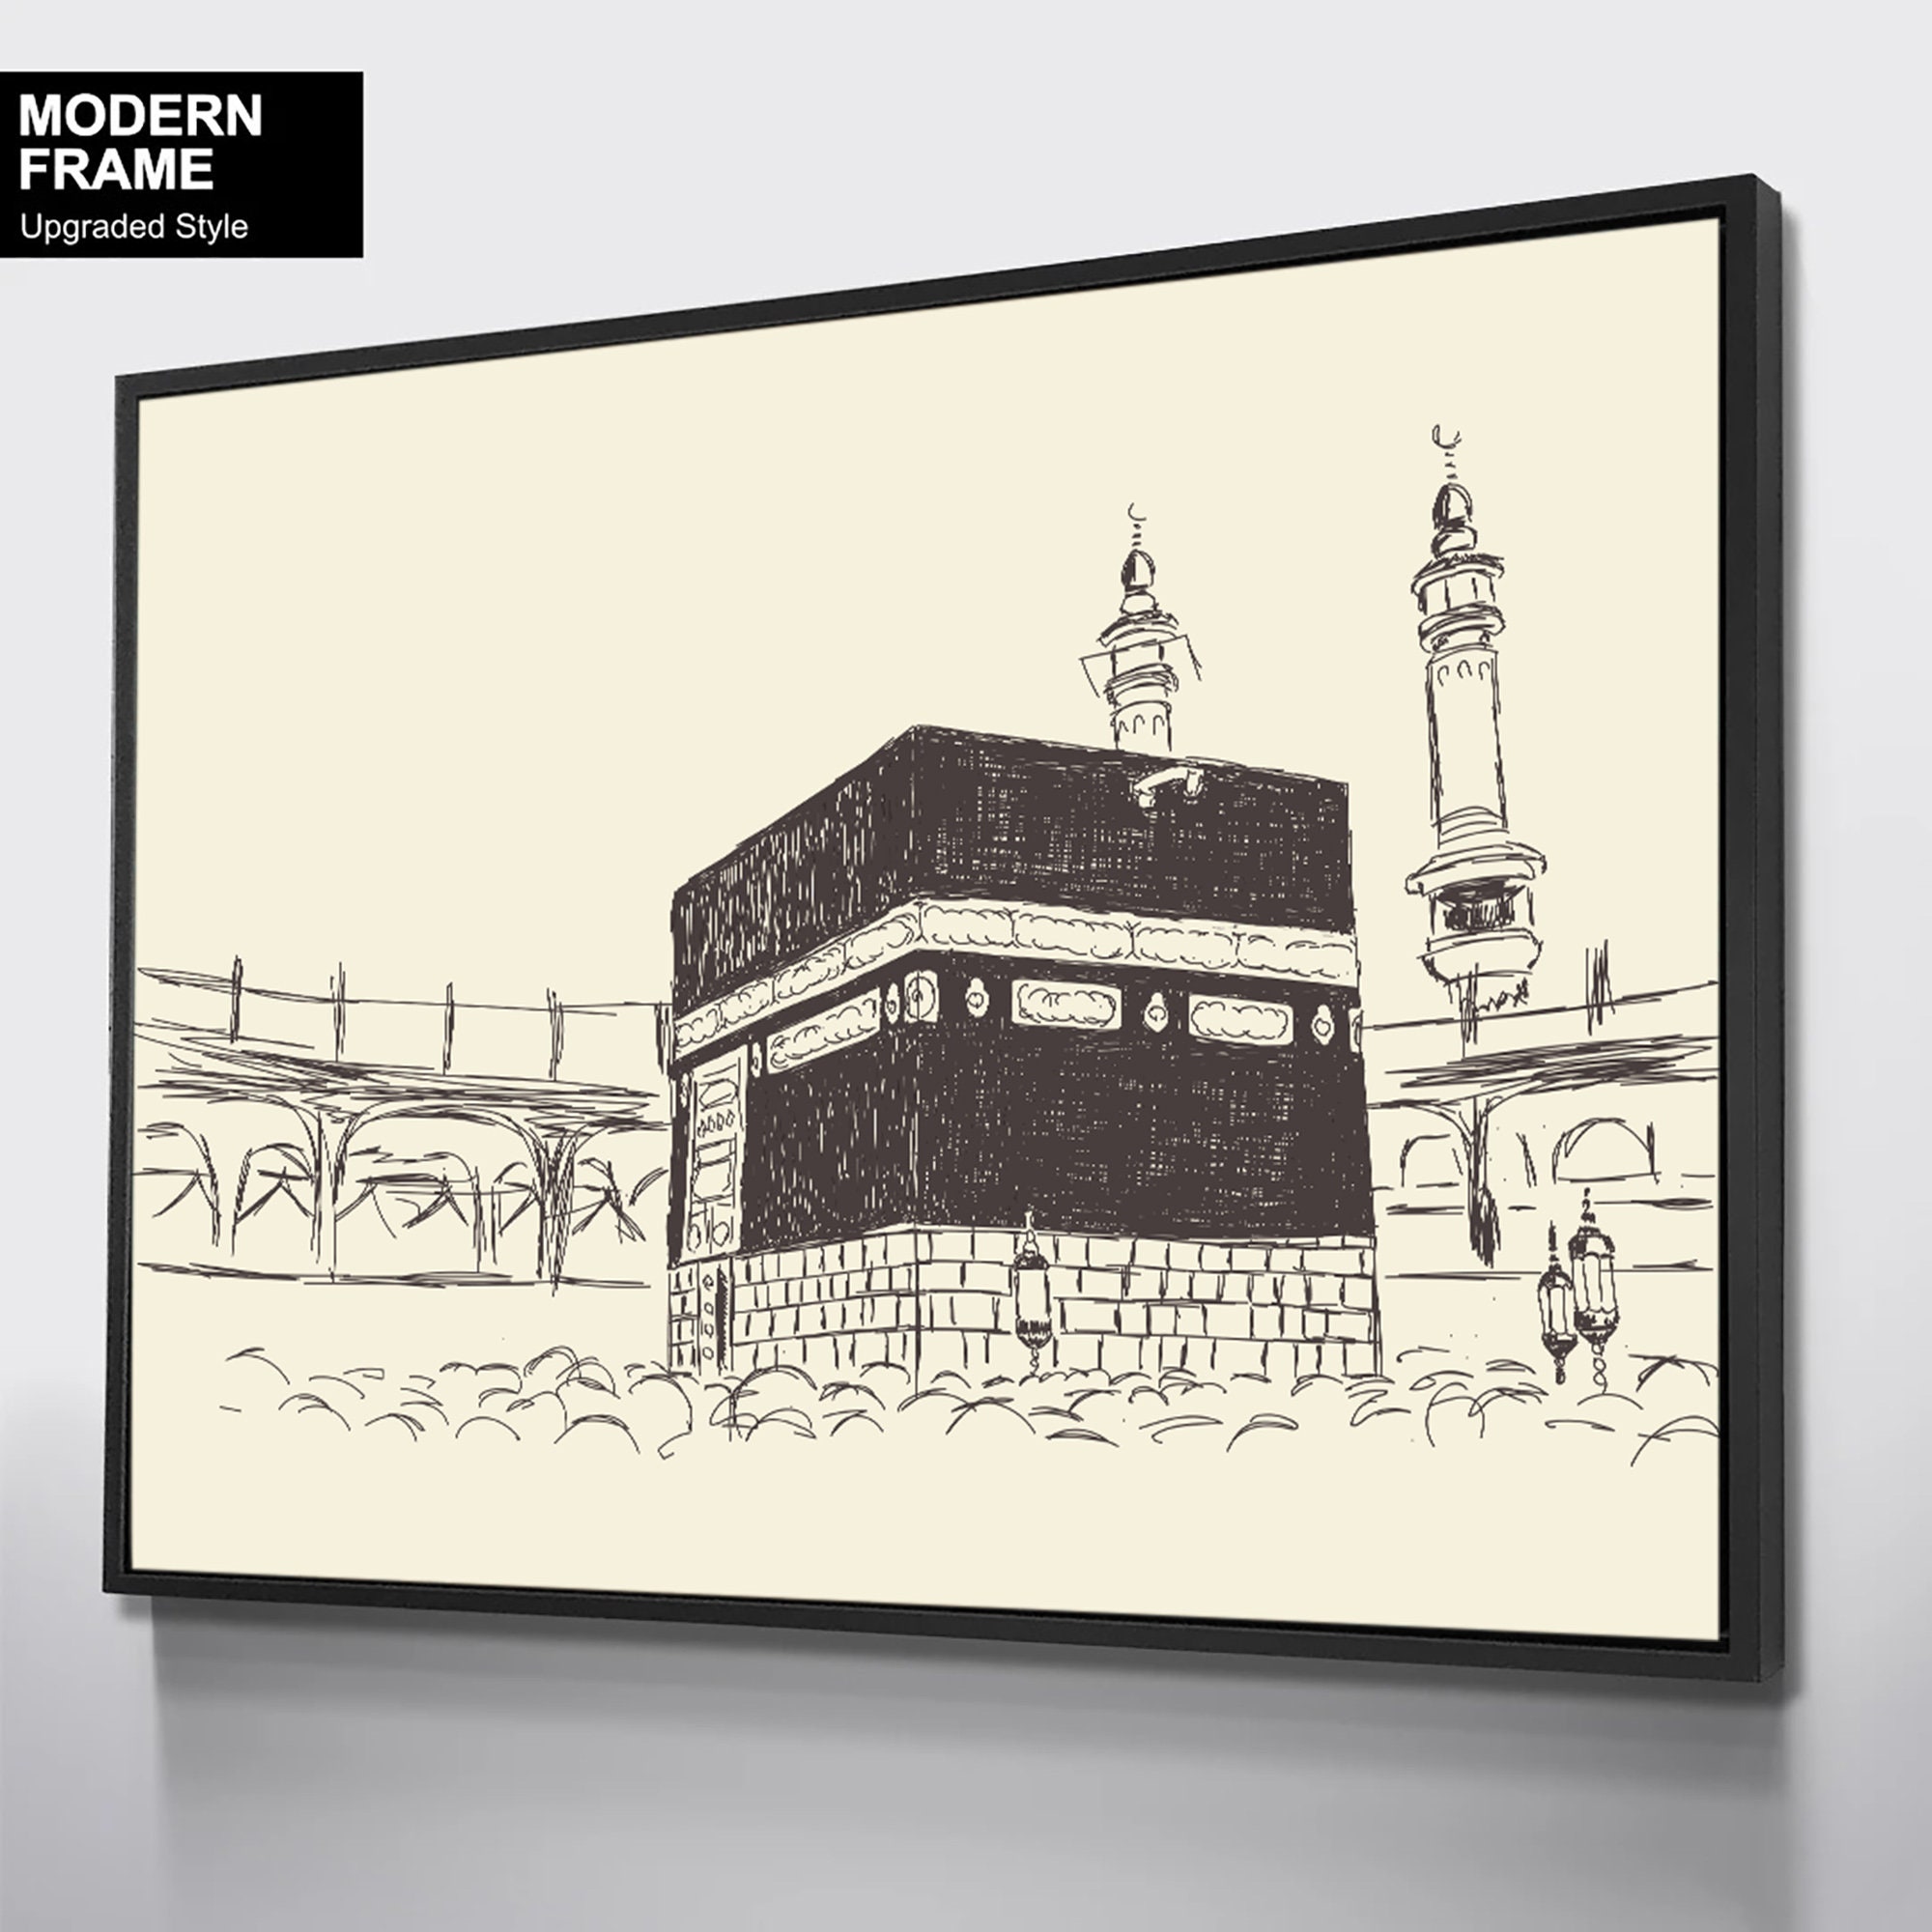 Hand Draw Sketch of Mecca Kabah Stock Illustration  Illustration of mecca  kareem 120930093